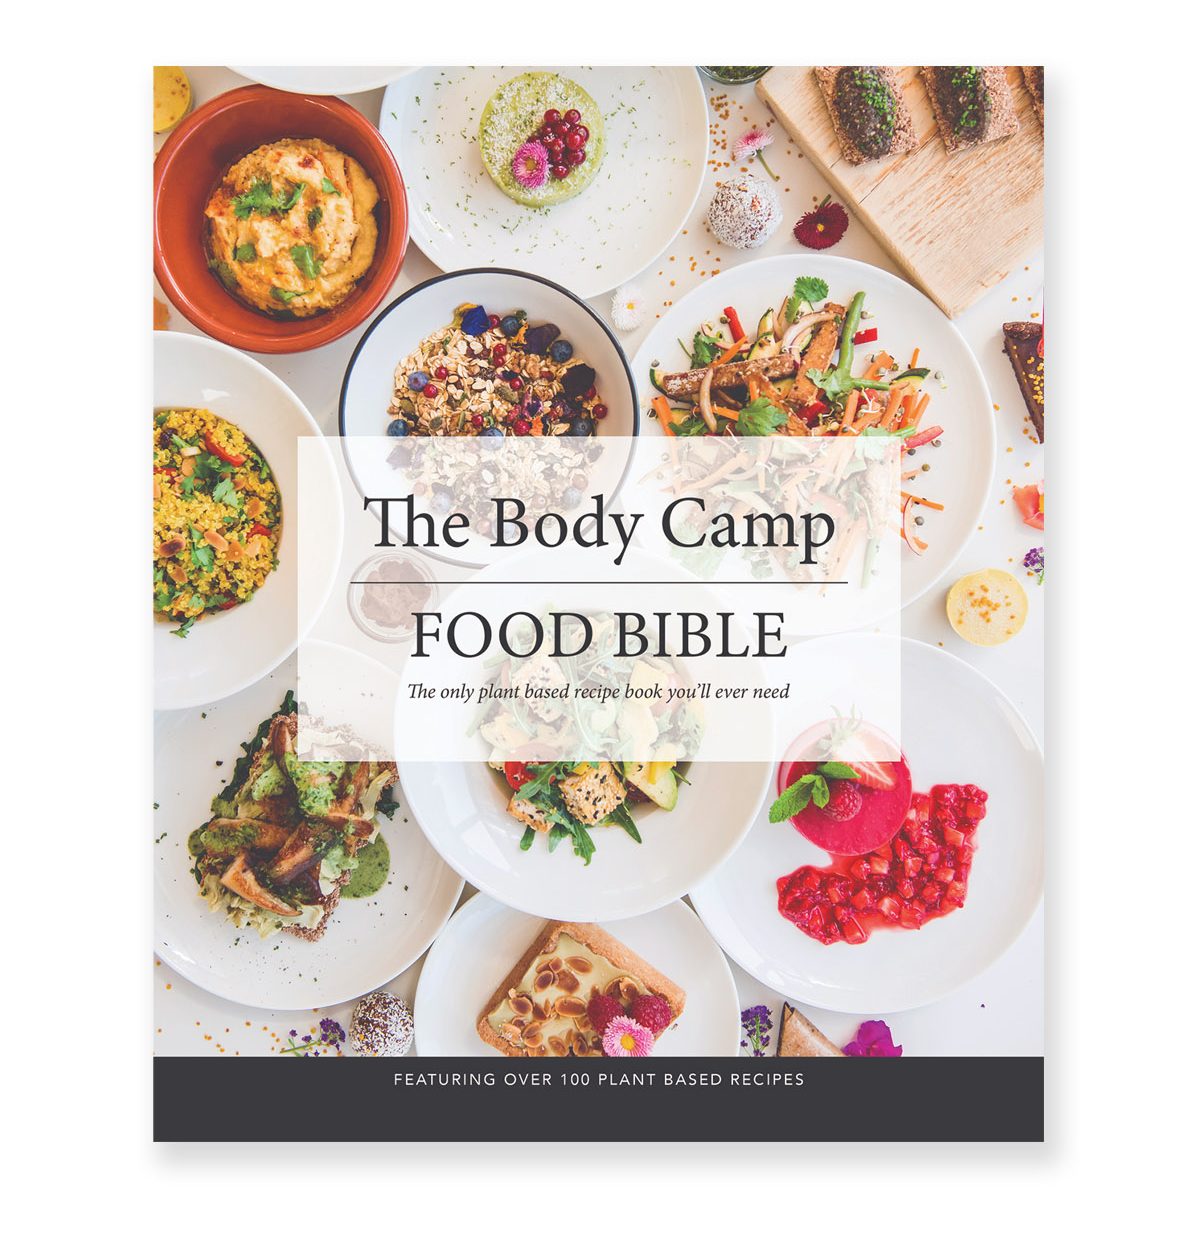 The body camp